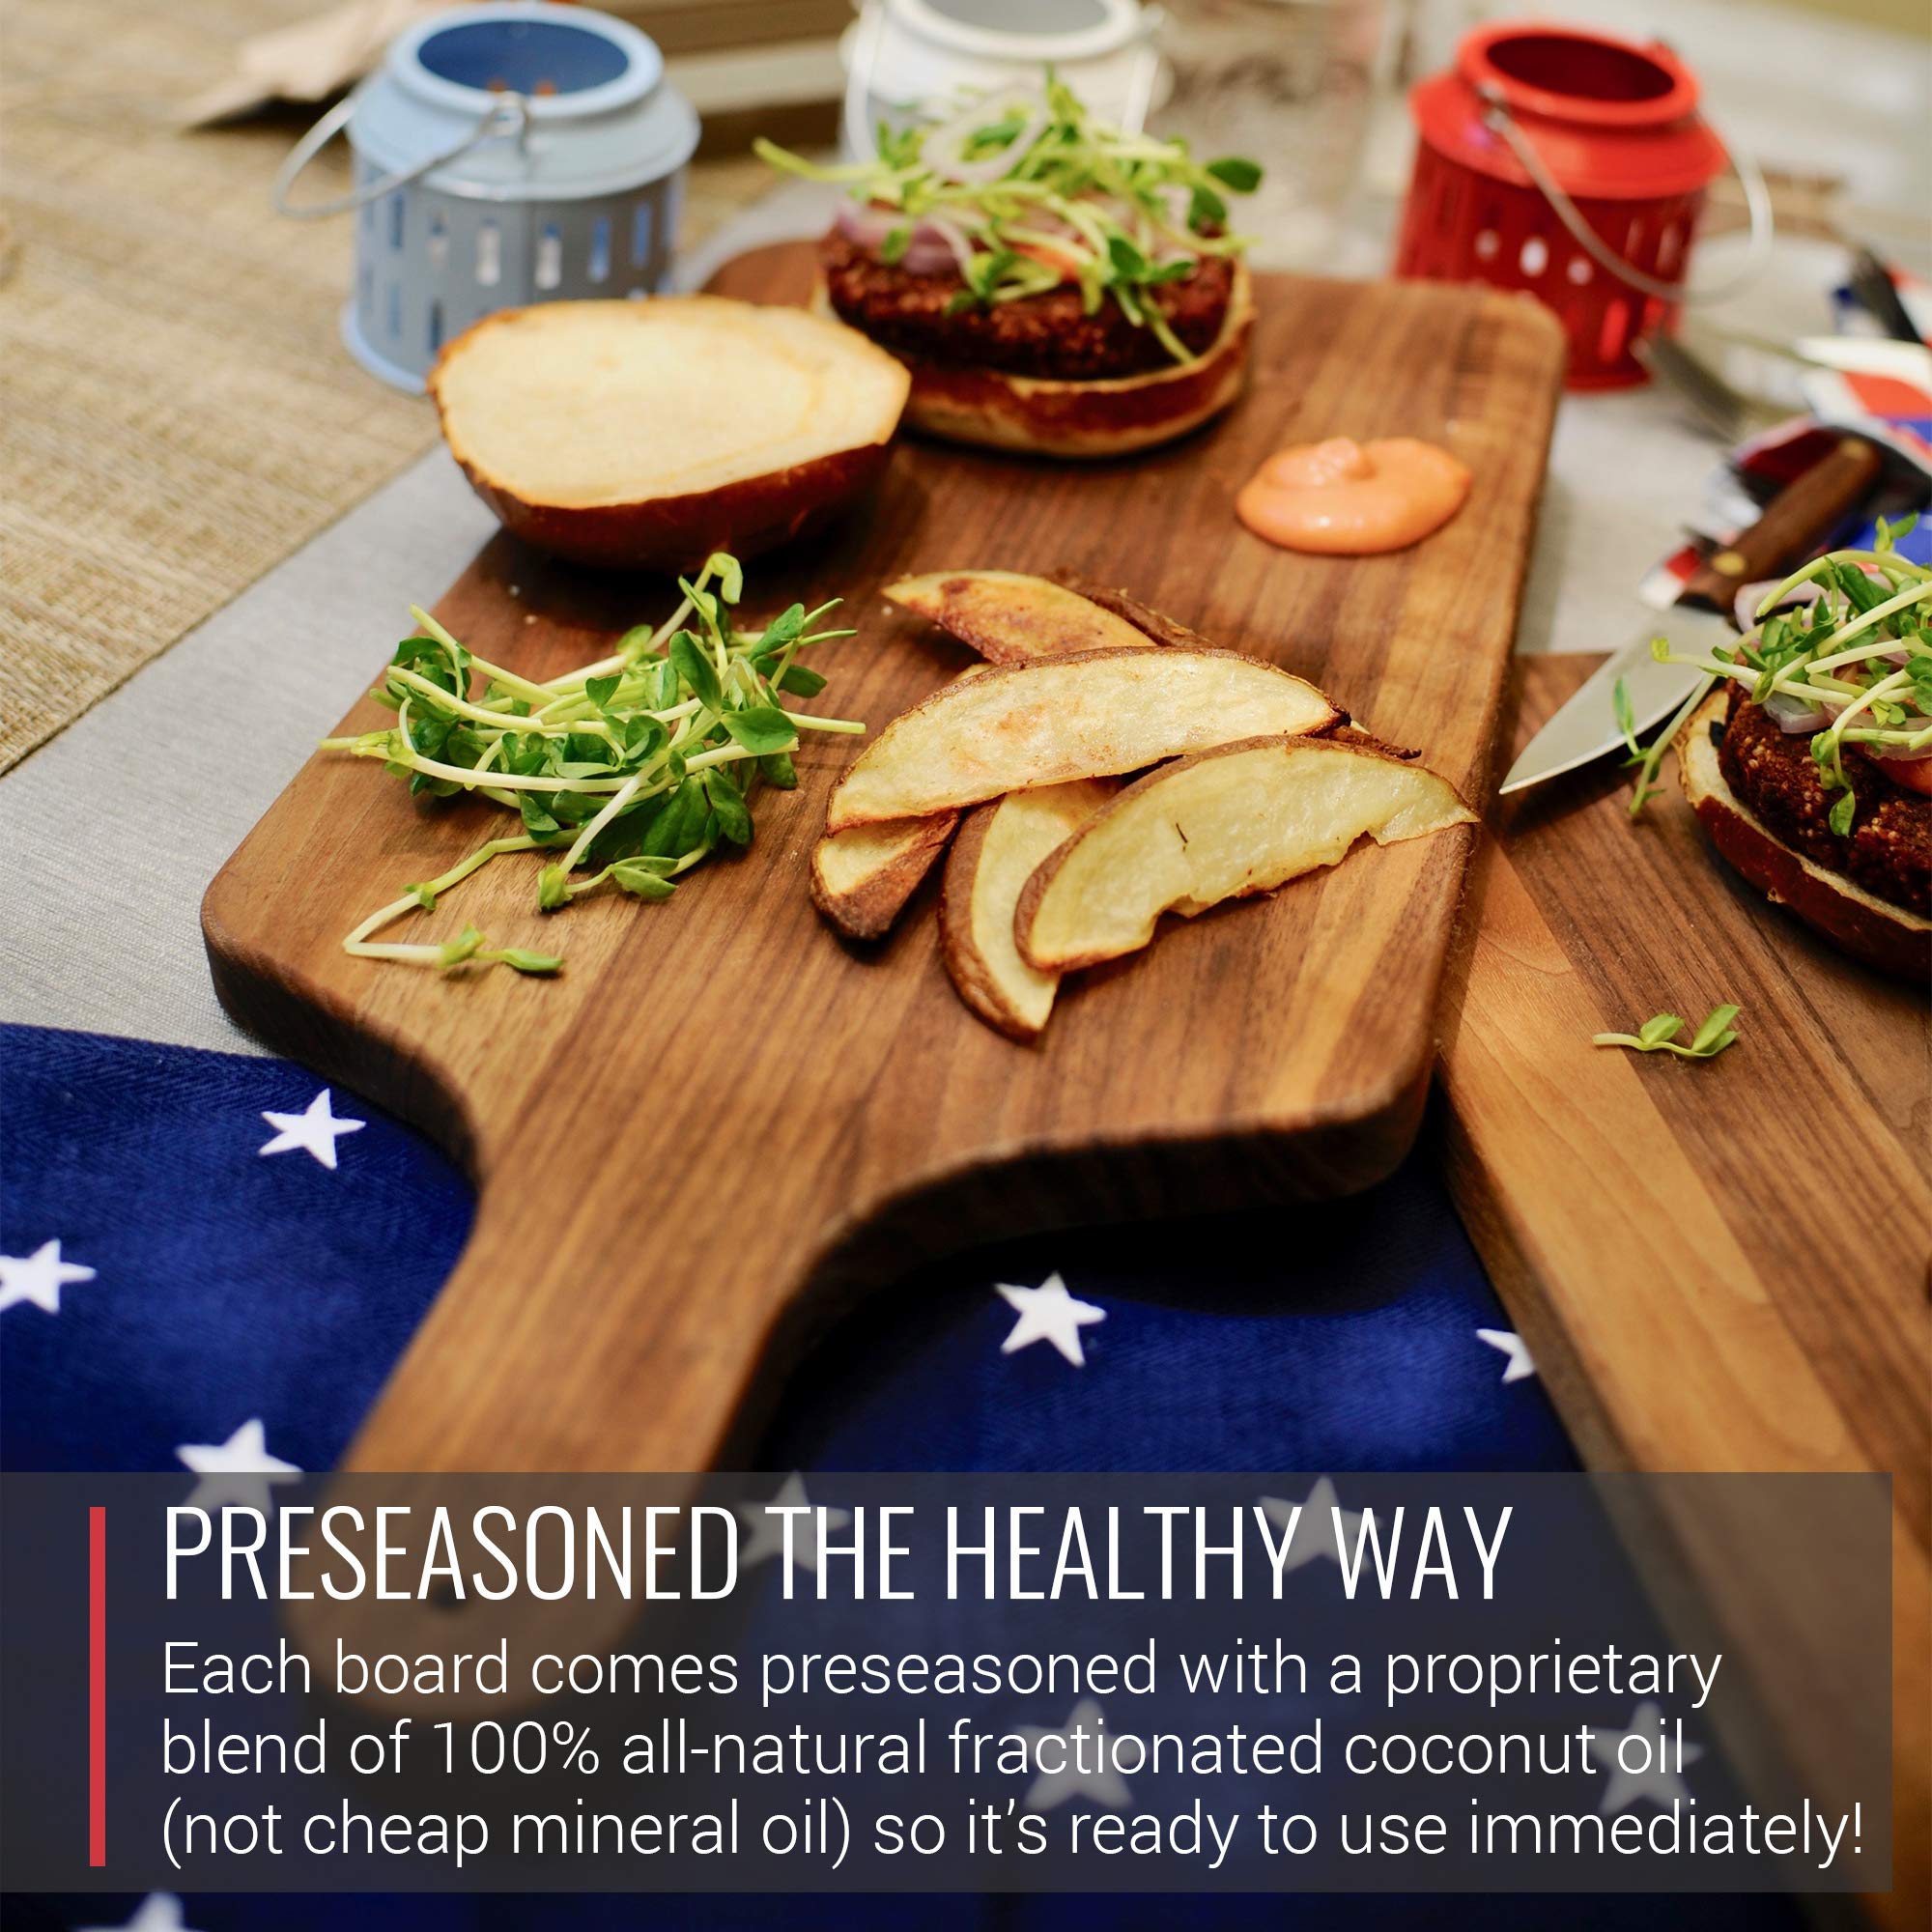 Made in USA Walnut Cutting Board by Virginia Boys Kitchens - Butcher Block made from Sustainable Hardwood (Handle - 8x17)